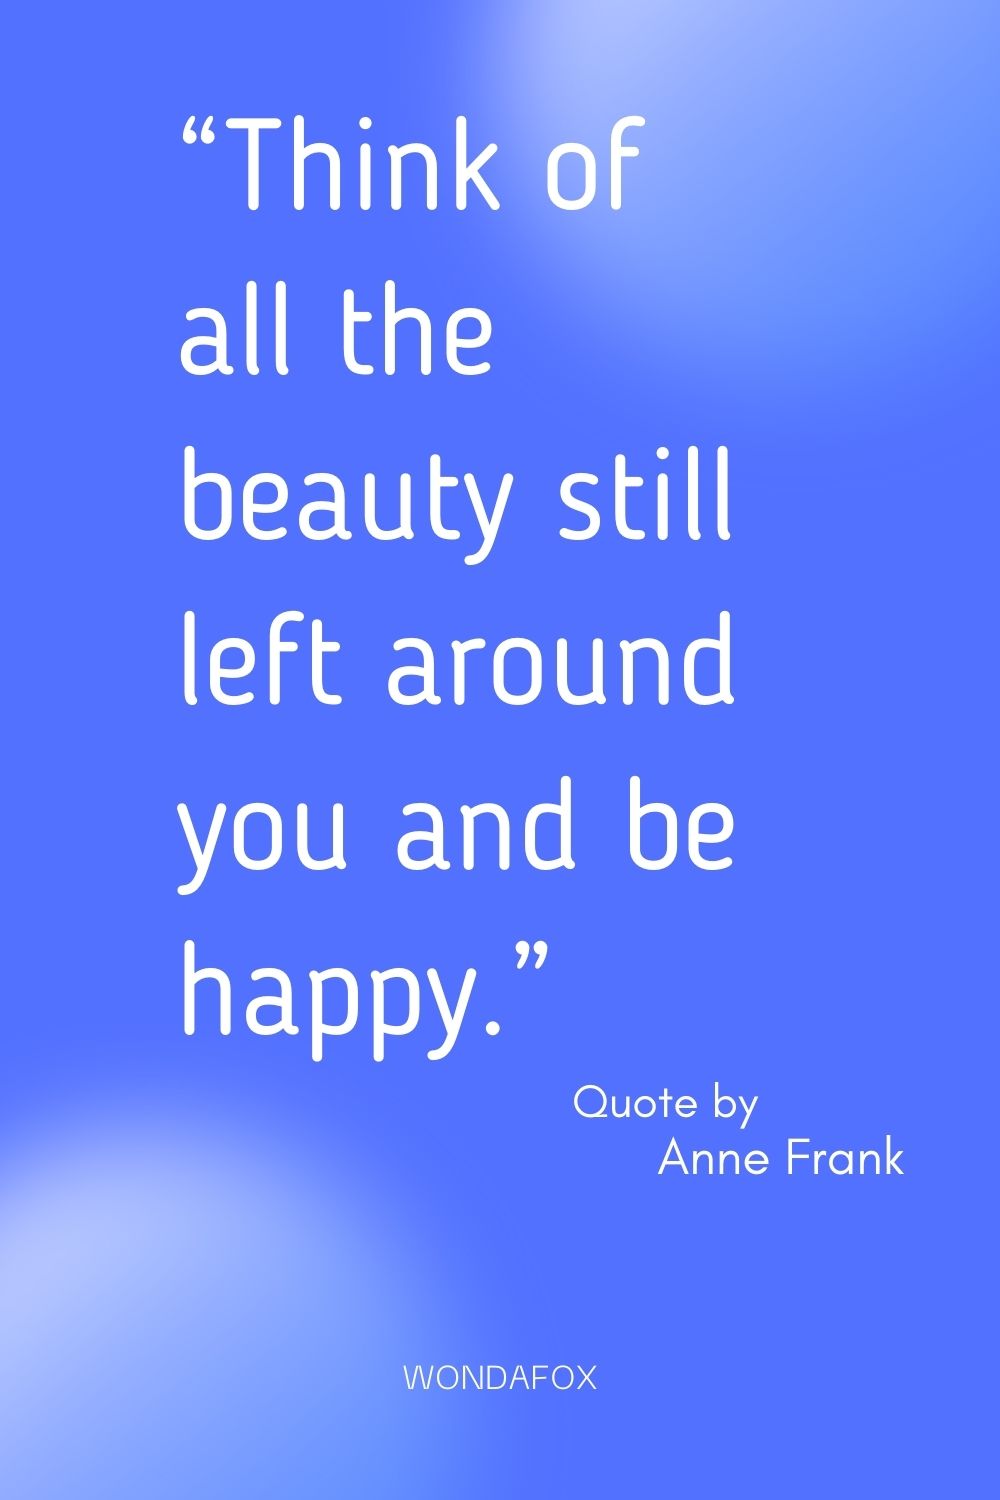 “Think of all the beauty still left around you and be happy.”
Anne Frank